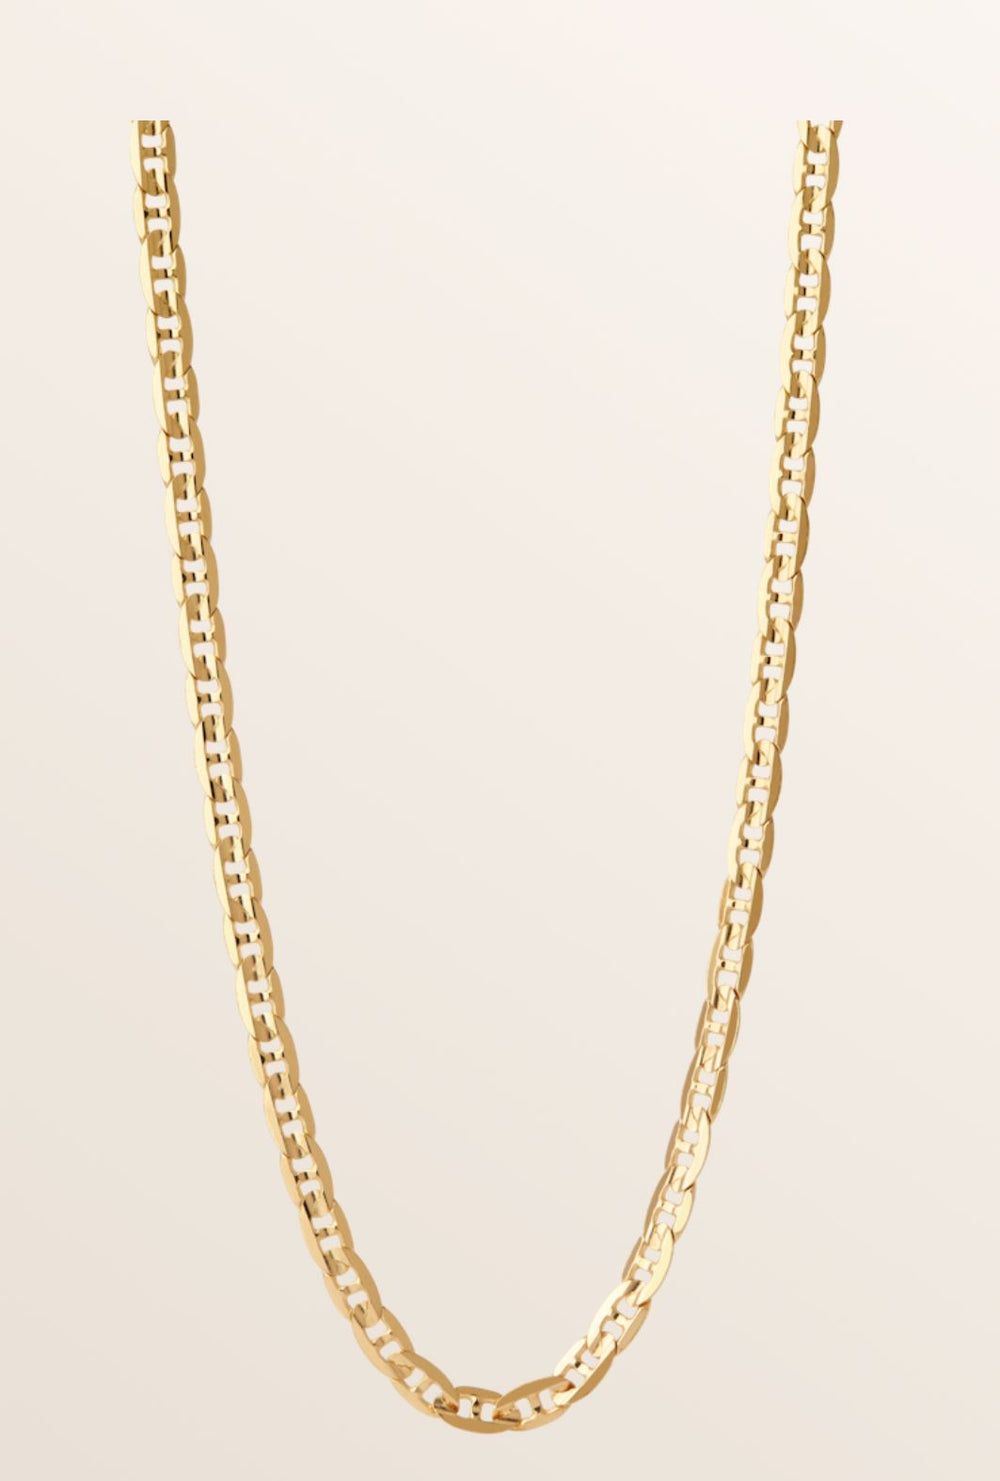 CARLO GOLD PLATED NECKLACE 50 CM JEWELRY MARIA BLACK 